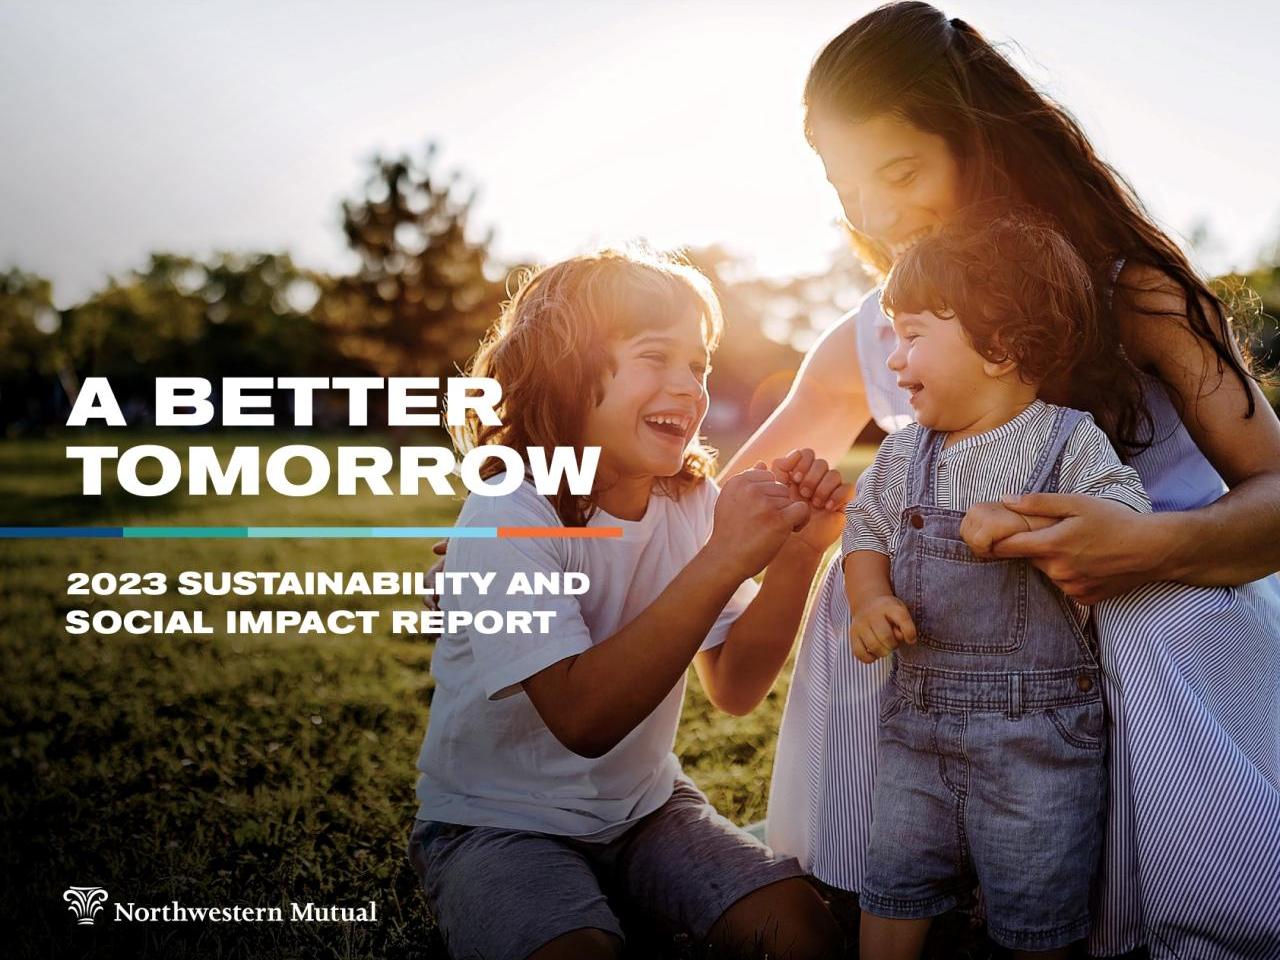 "A Better Tomorrow 2023 Sustainability And Social Impact Report" over the image of an adult and two children outside.